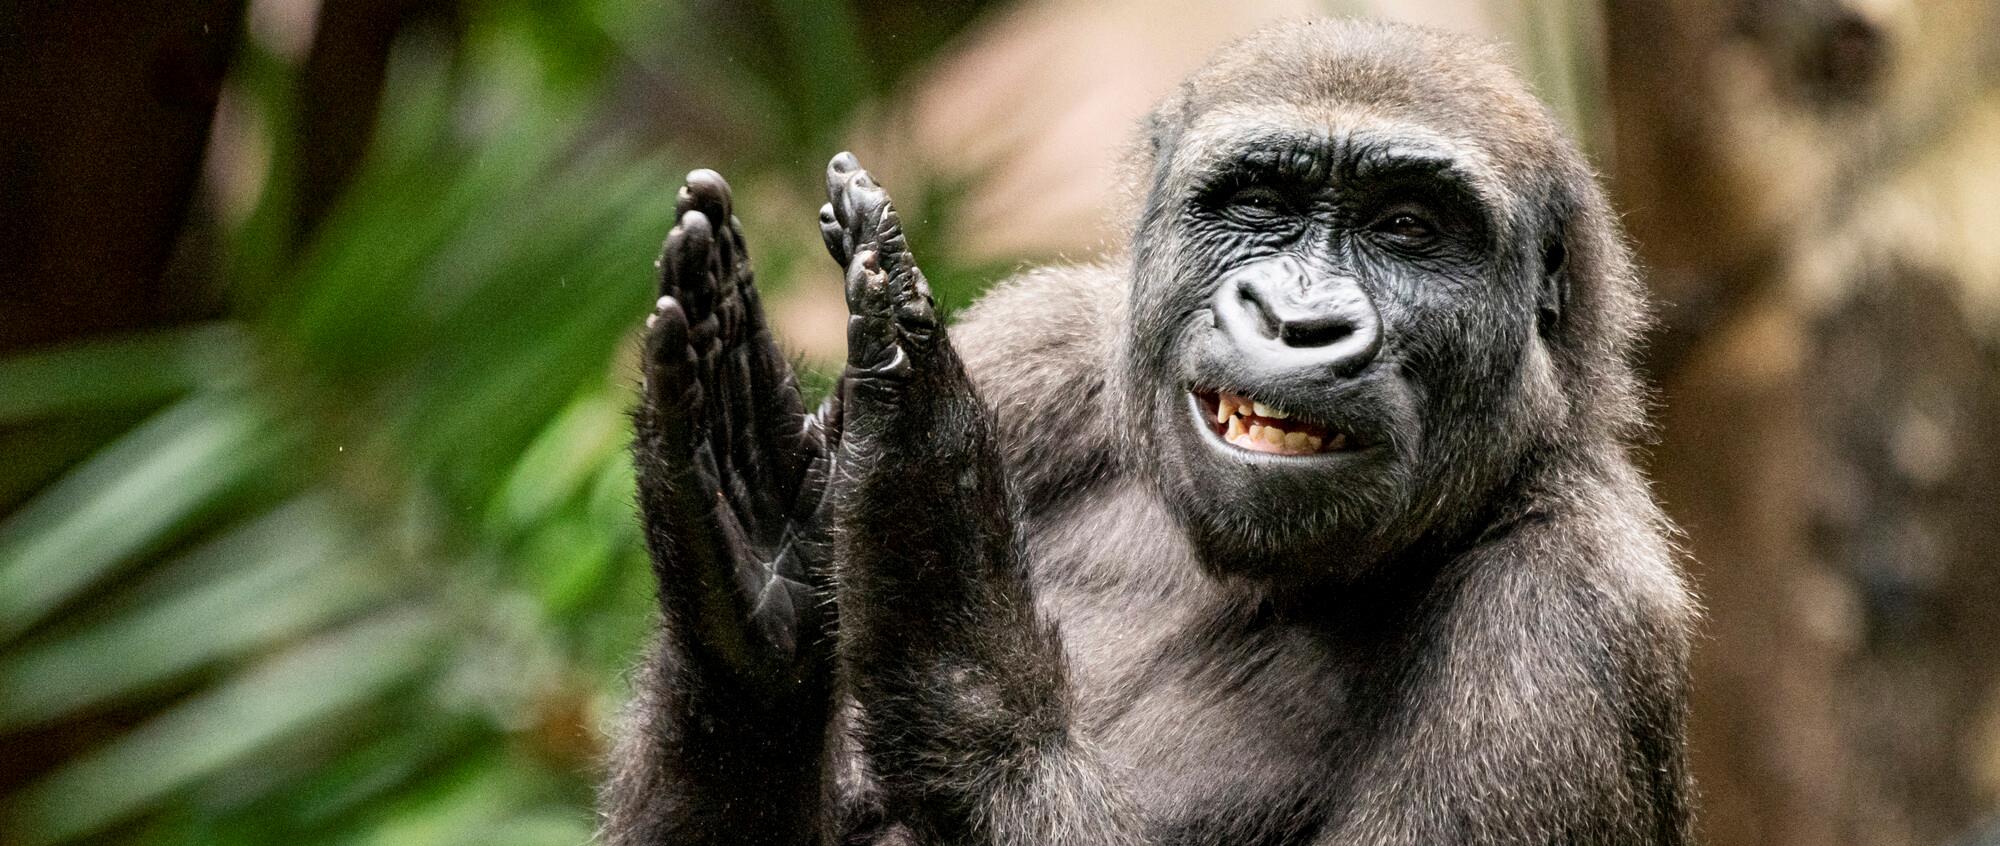 Western Lowland Gorilla looking towards a camera with funny expression on face clapping hands